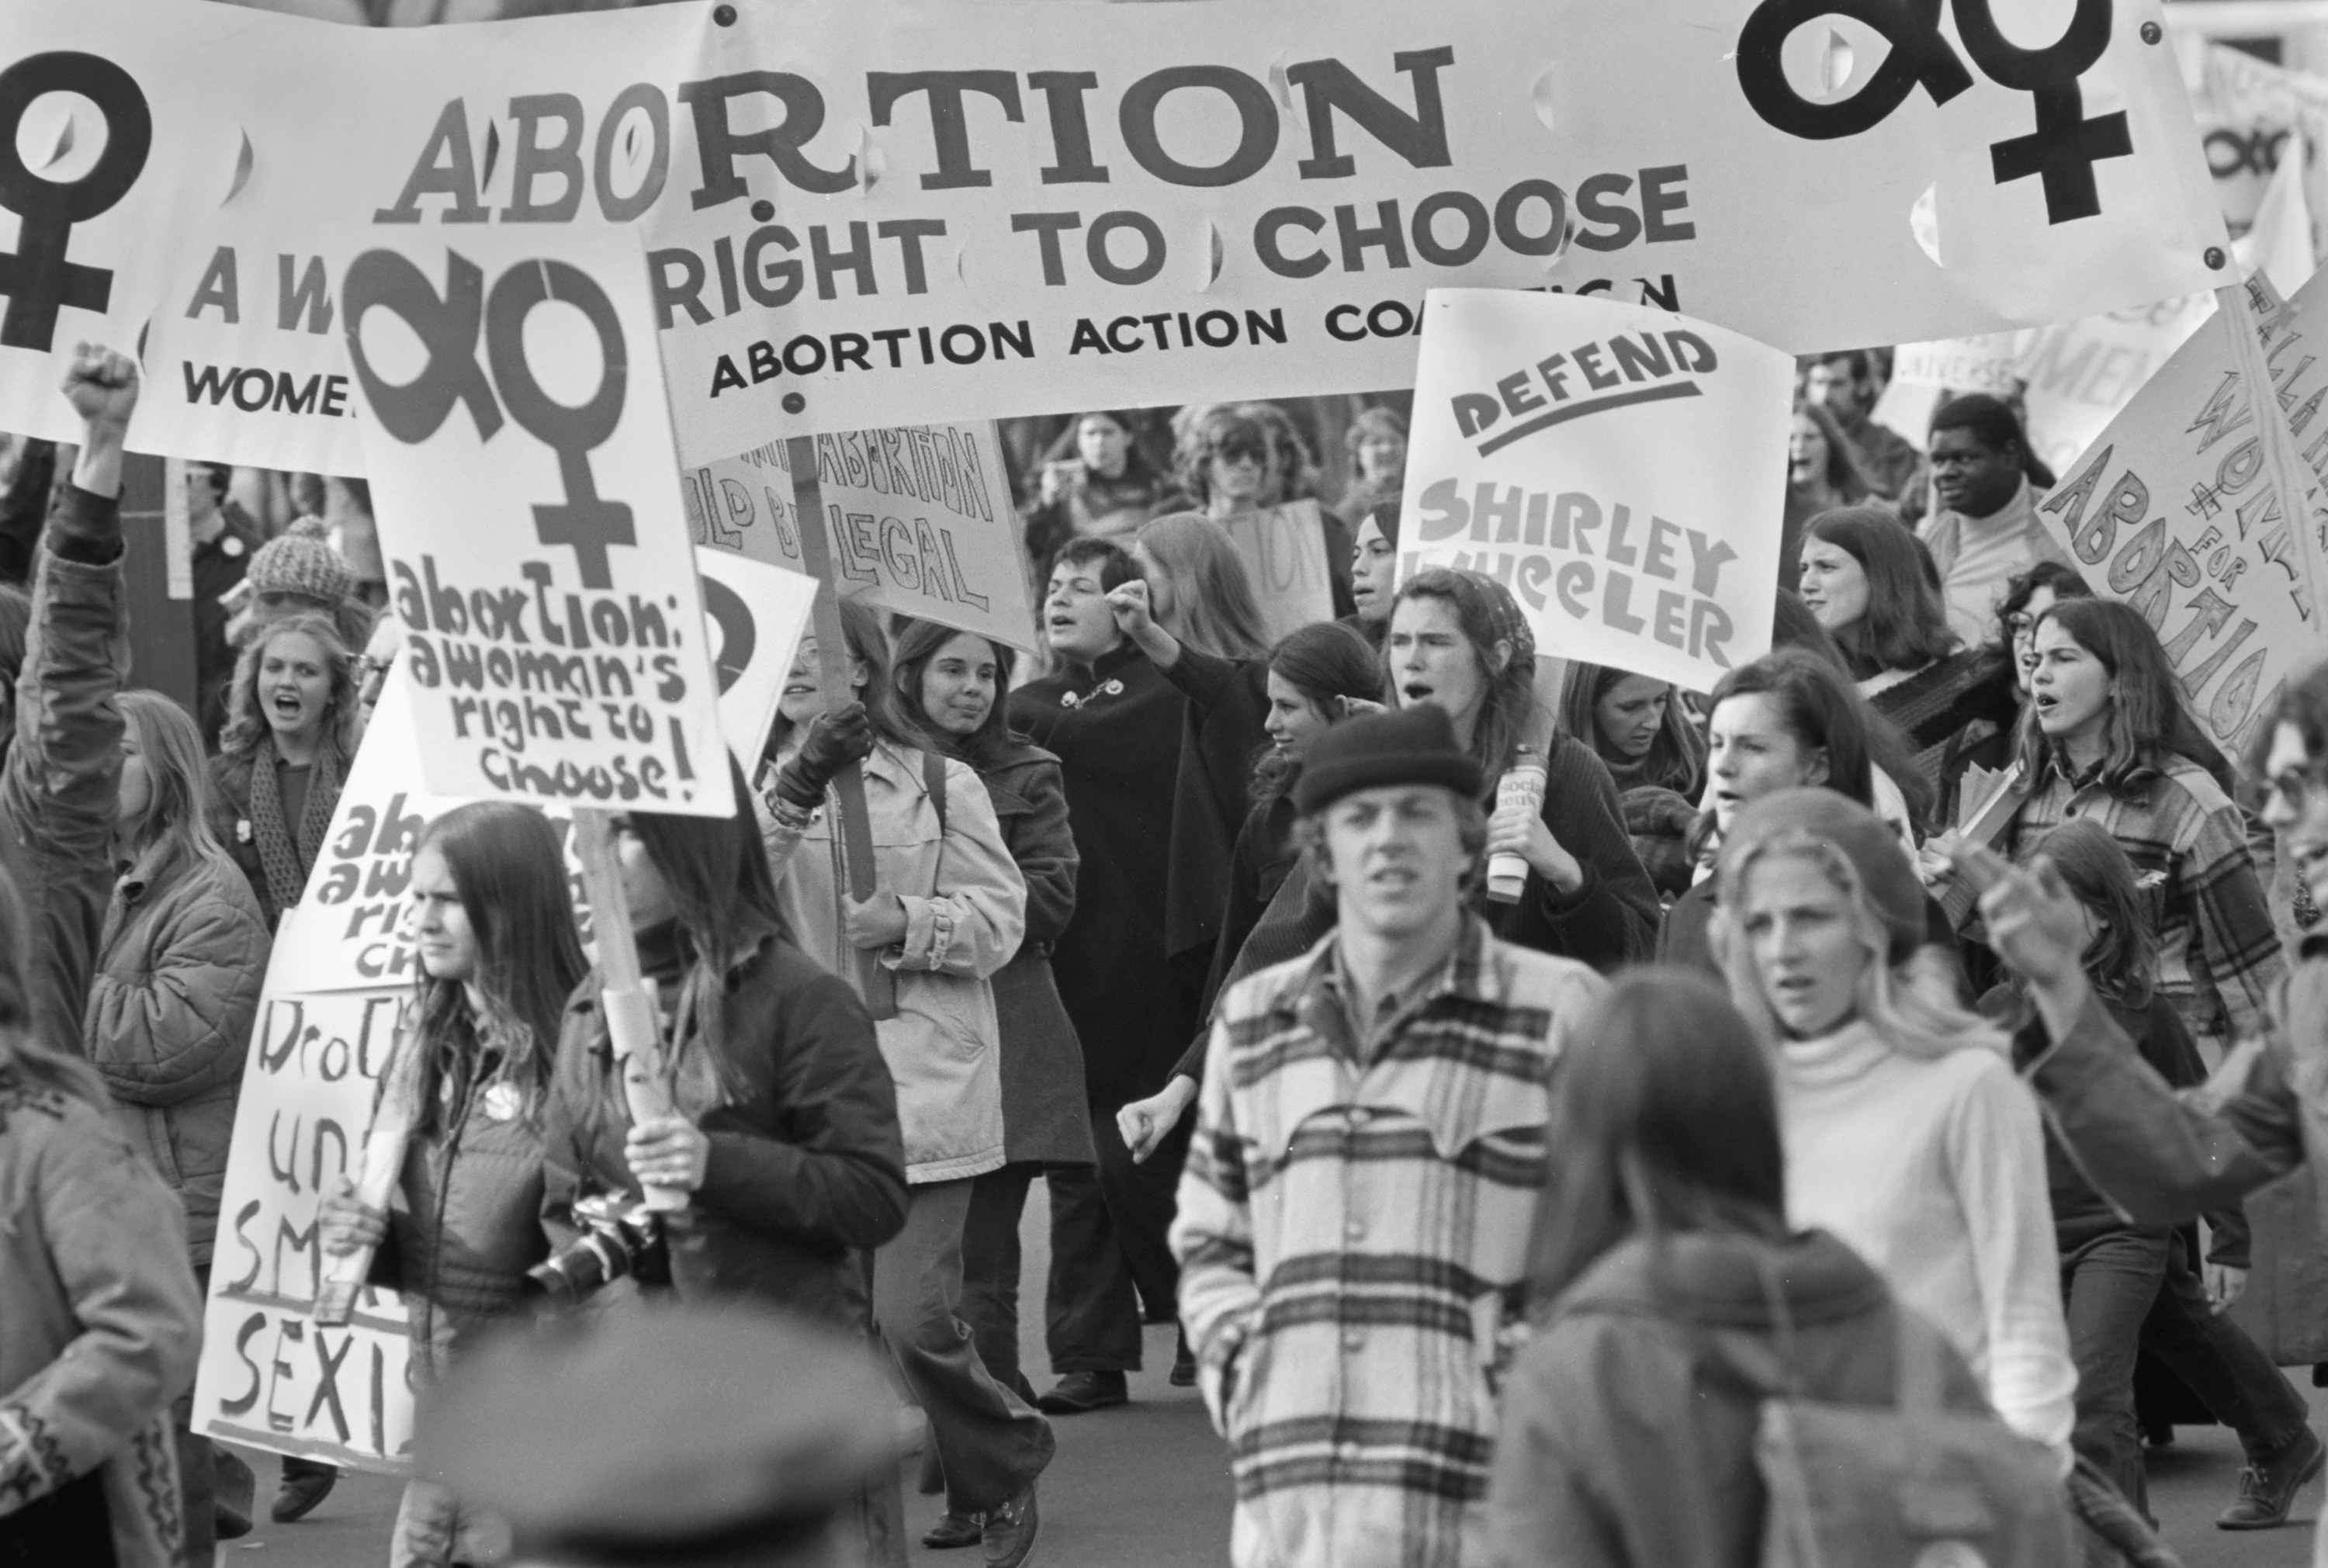 Pro-choice demonstrators march down Pennsylvania Ave in Washington, DC in 1970